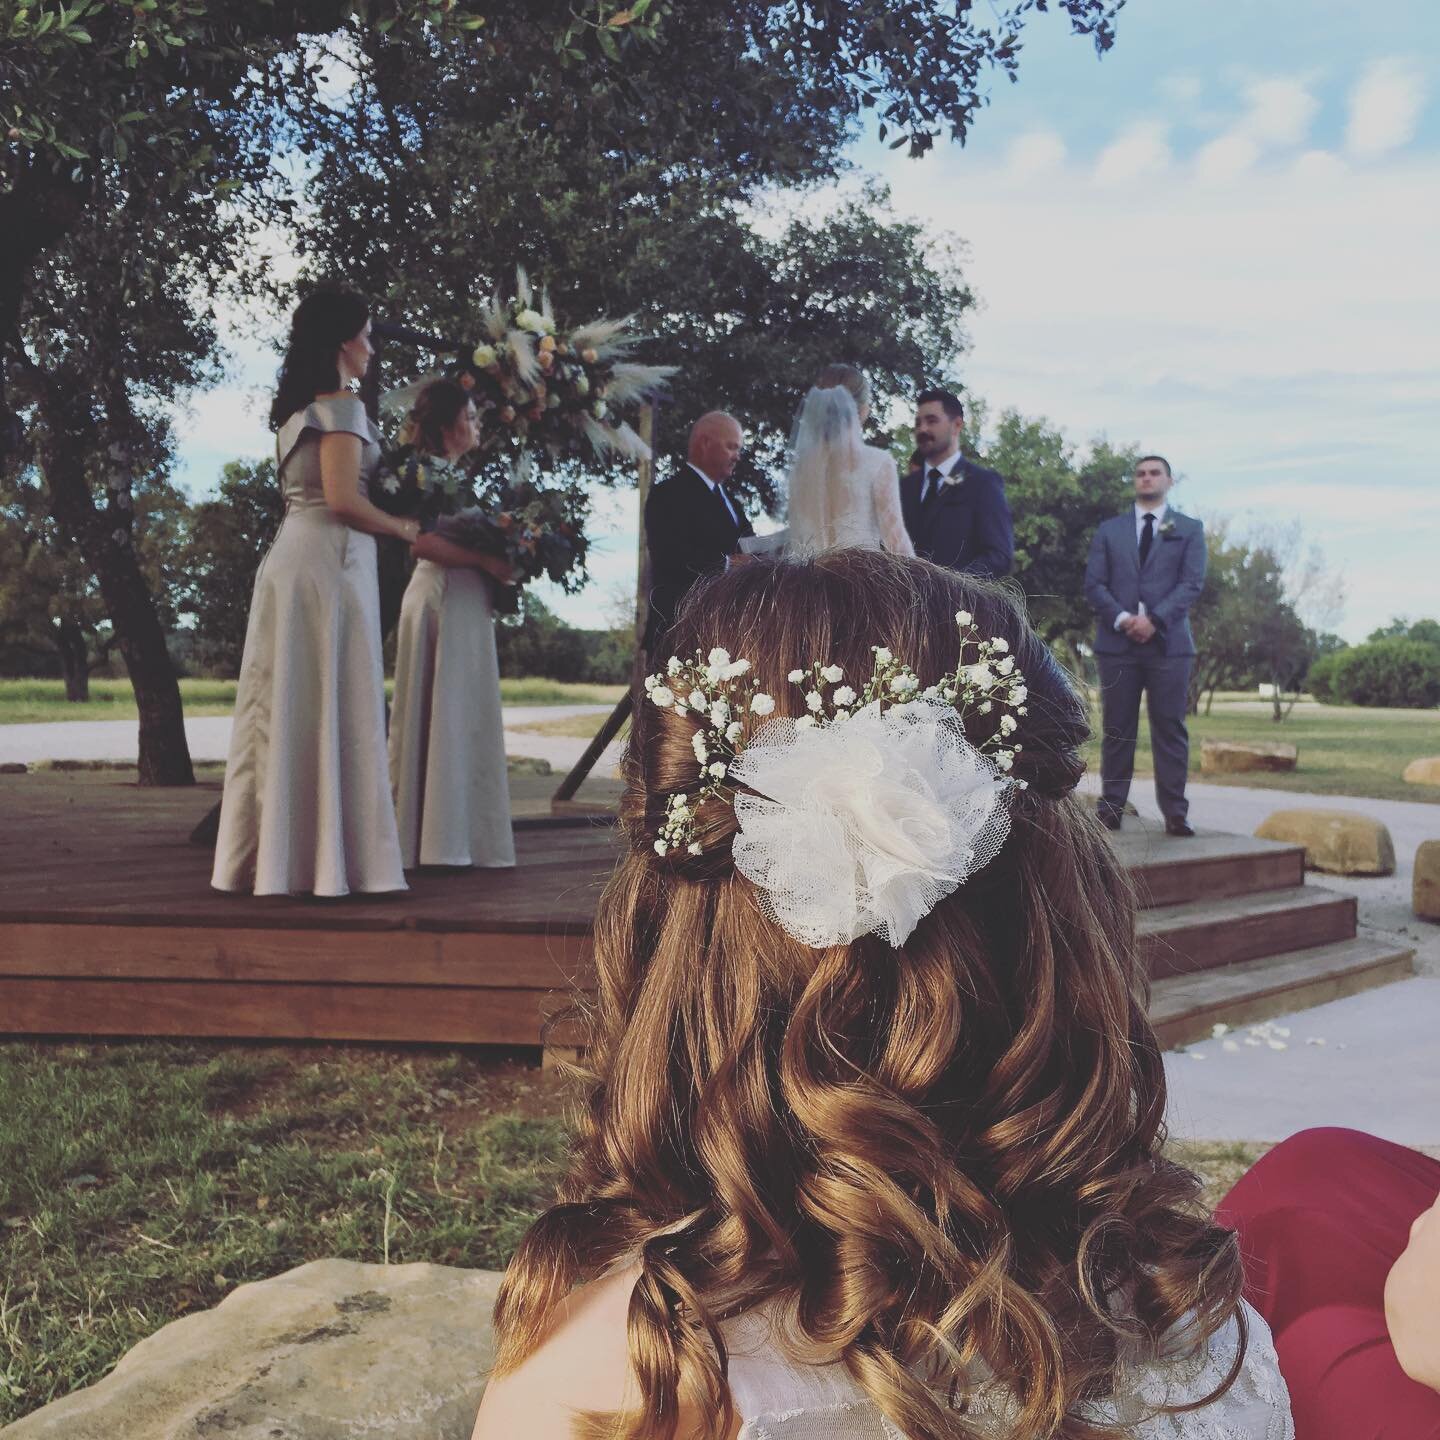 A wedding from the perspective of a flower girl (my daughter)...ceremony, speeches of gratitude, bride and groom dance, bride and father dance.